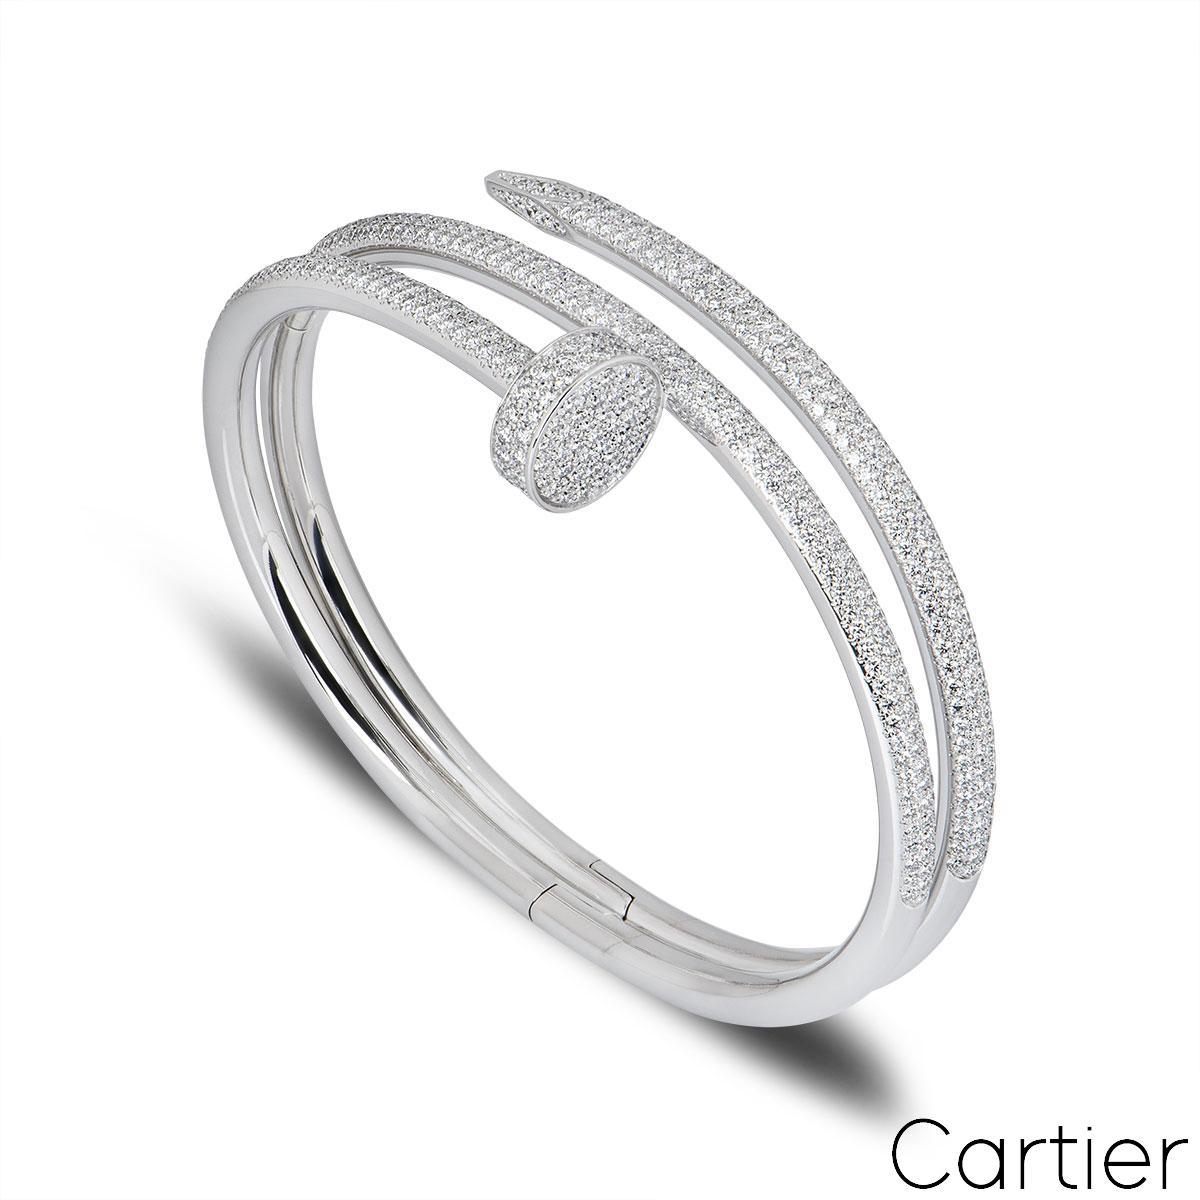 A stunning 18k white gold diamond bracelet by Cartier from the Juste Un Clou collection. The bracelet is of a nail design, fully pave set around the outer side with 624 round brilliant cut diamonds totalling 3.61ct. The bracelet measures 2cm at the